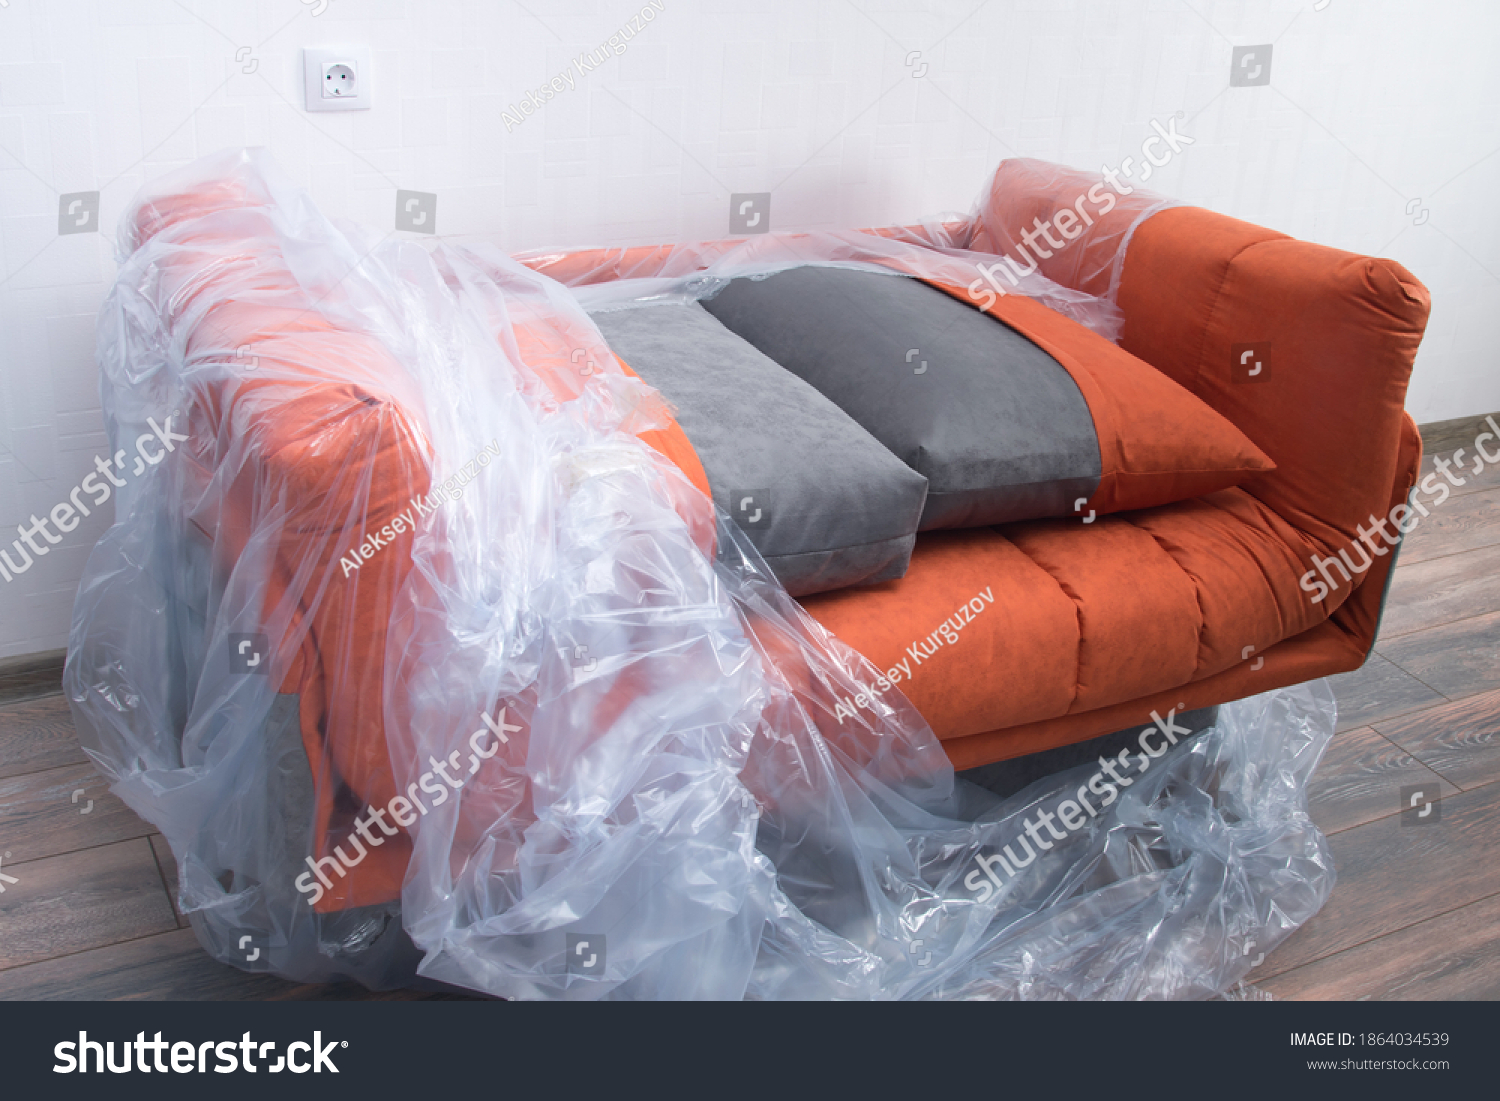 there is an orange sofa in the room, partially covered with plastic wrap to protect it from dirt and dust #1864034539